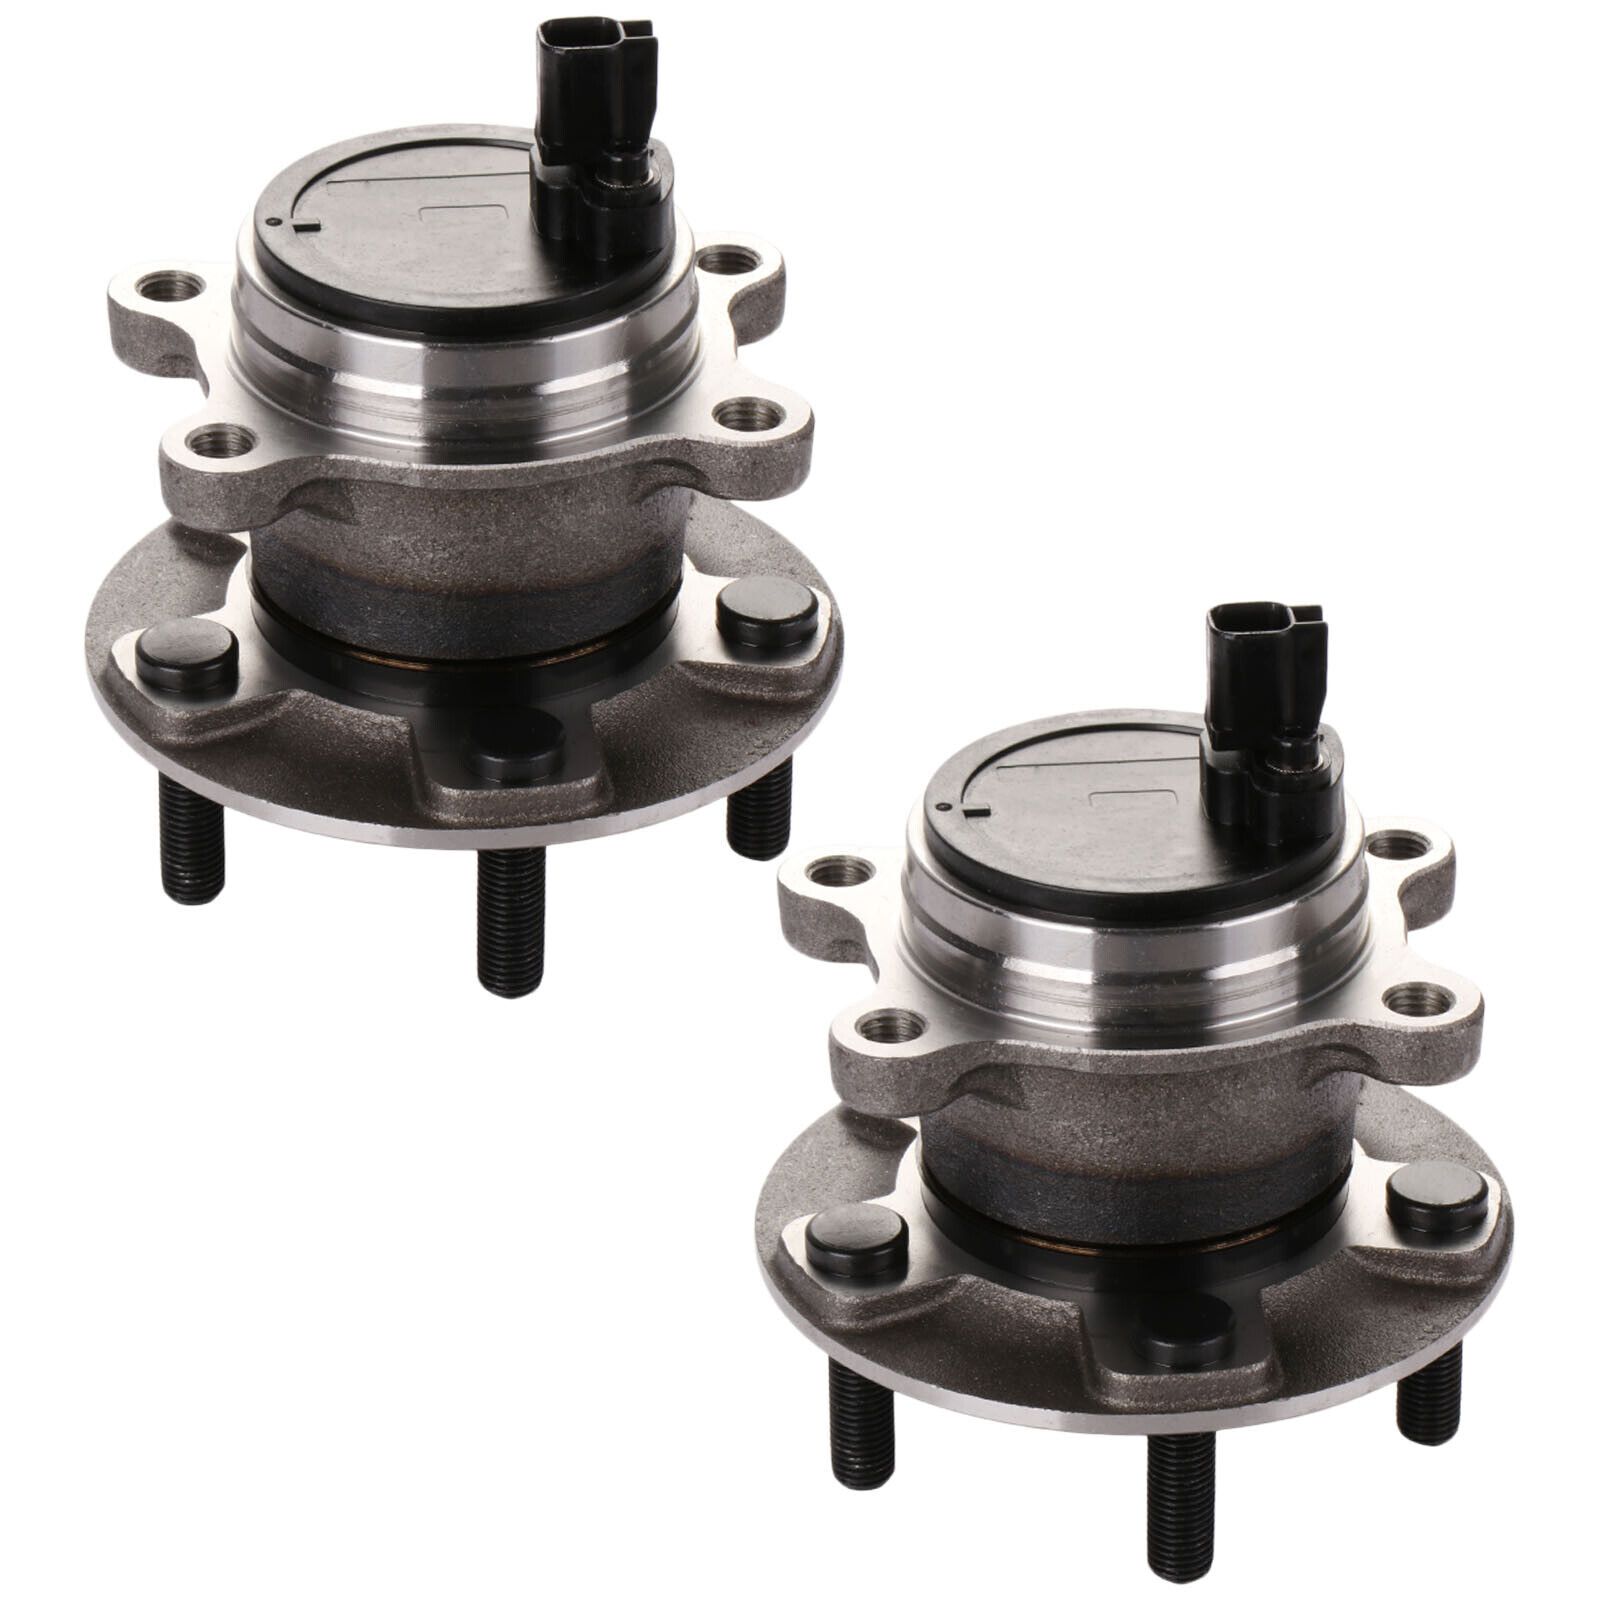 2x Rear Wheel Bearing Hub Assembly For 2012-16 Ford Focus Hatchback 4-Door 2.0L